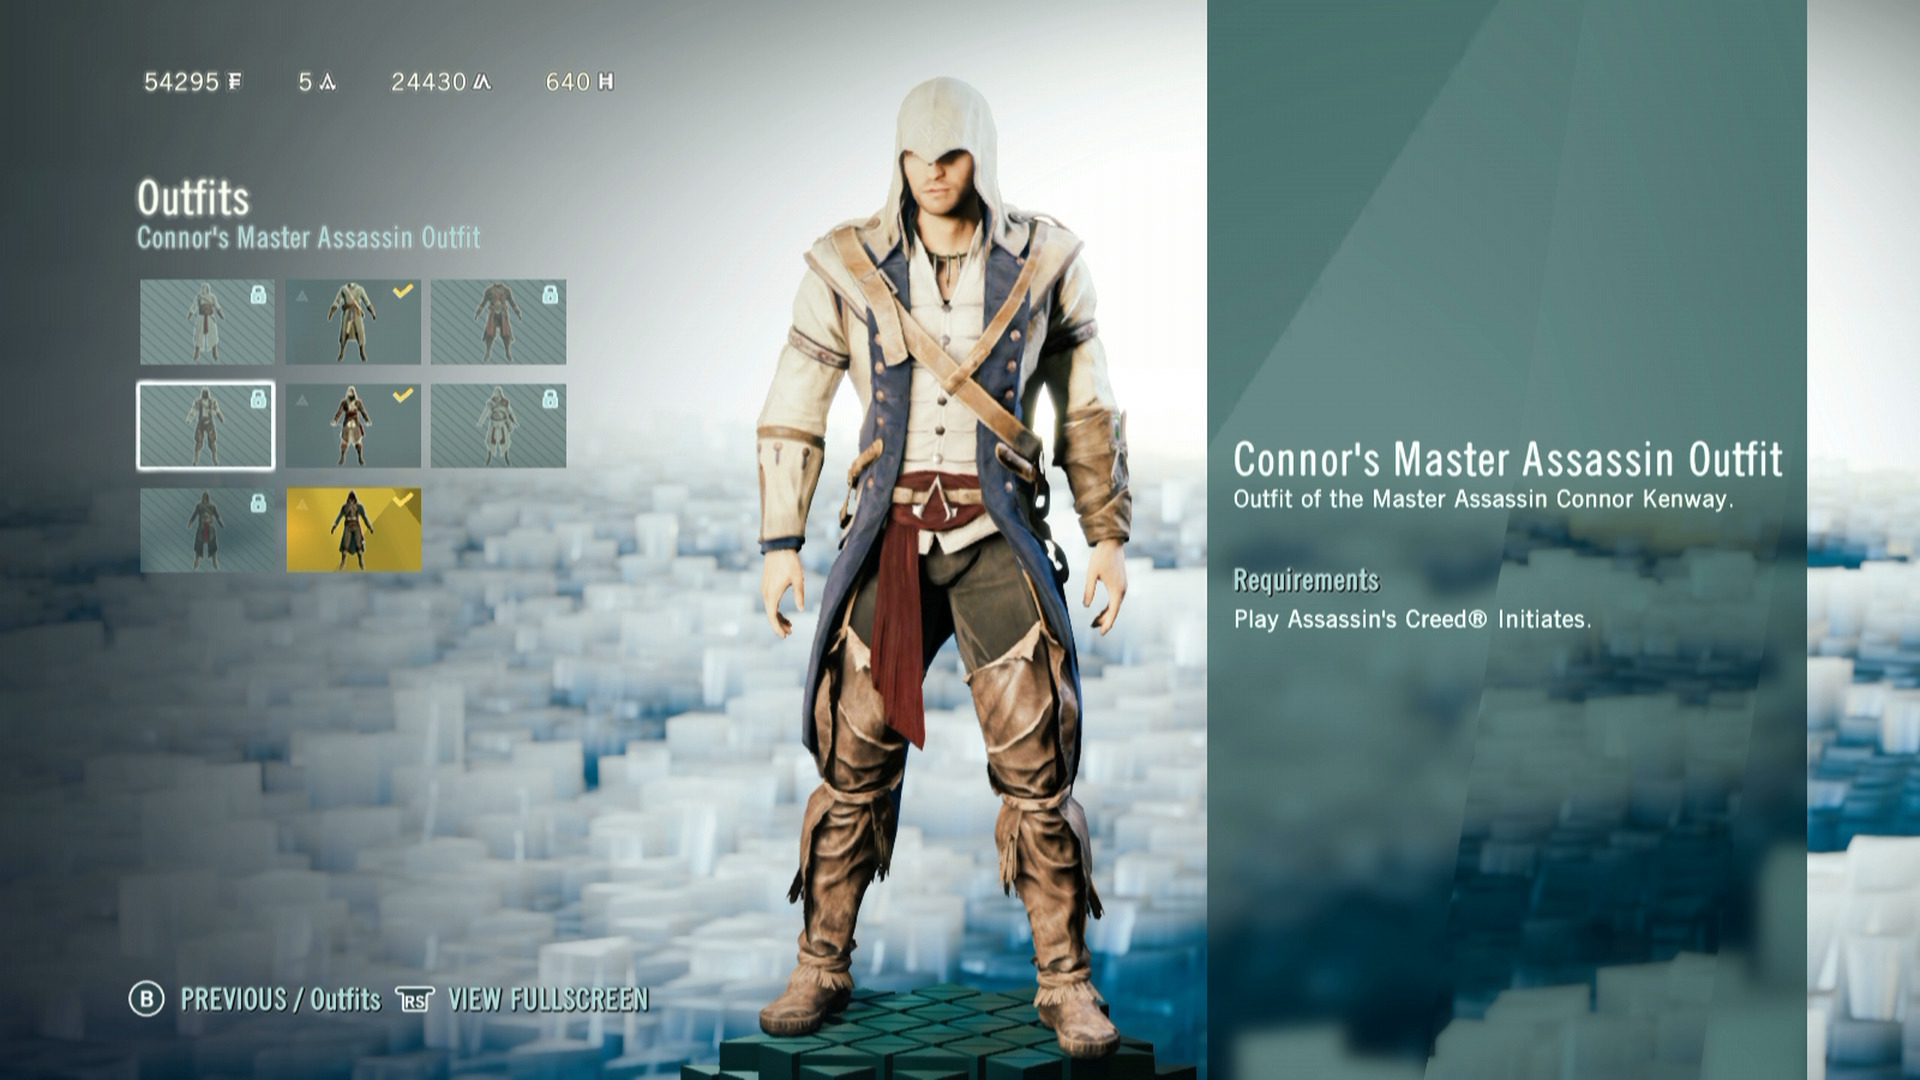 Uplay user getnameutf8. Мастер ассасин. Connor outfit. Assassins Creed 3 Connor Kenway. AC Unity Connor.